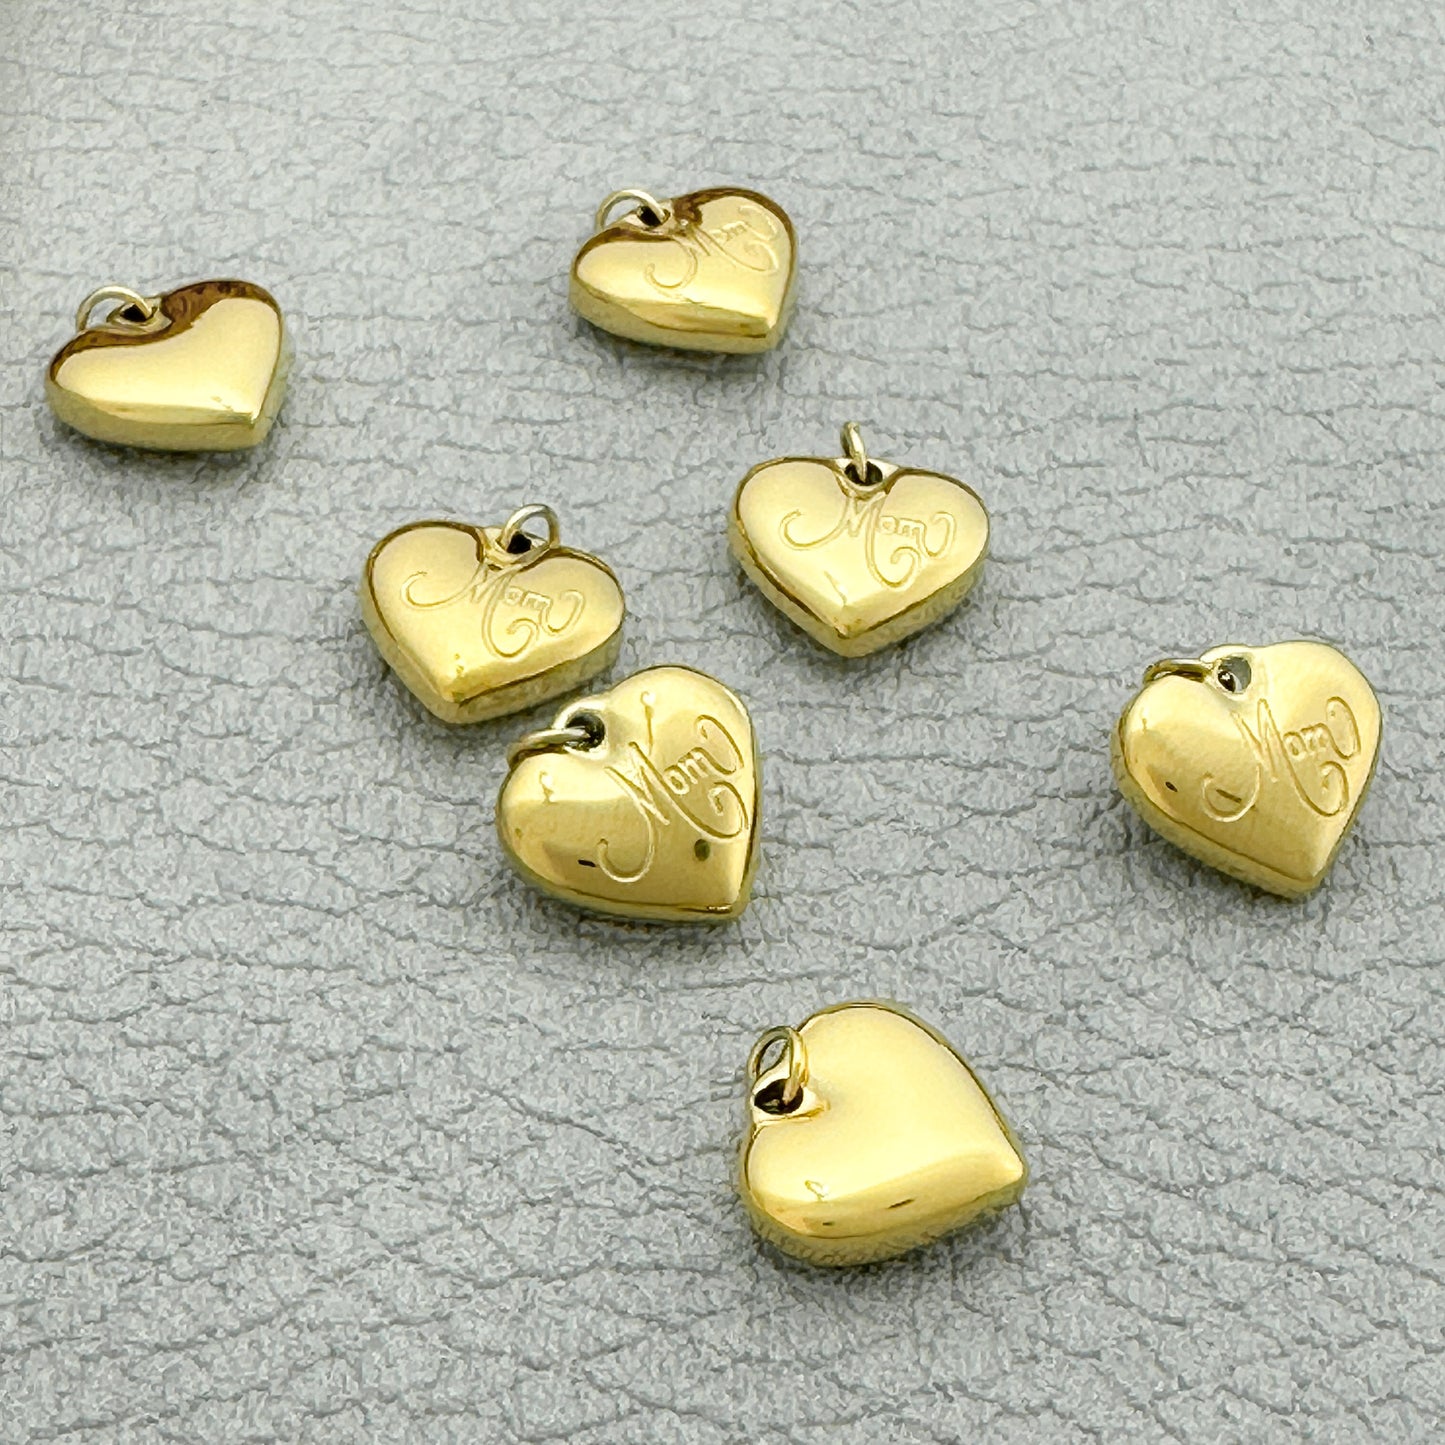 Mom's Day Heart 12x11mm Engraved "Mom" Gold Charm - 1 pc. (M1944)